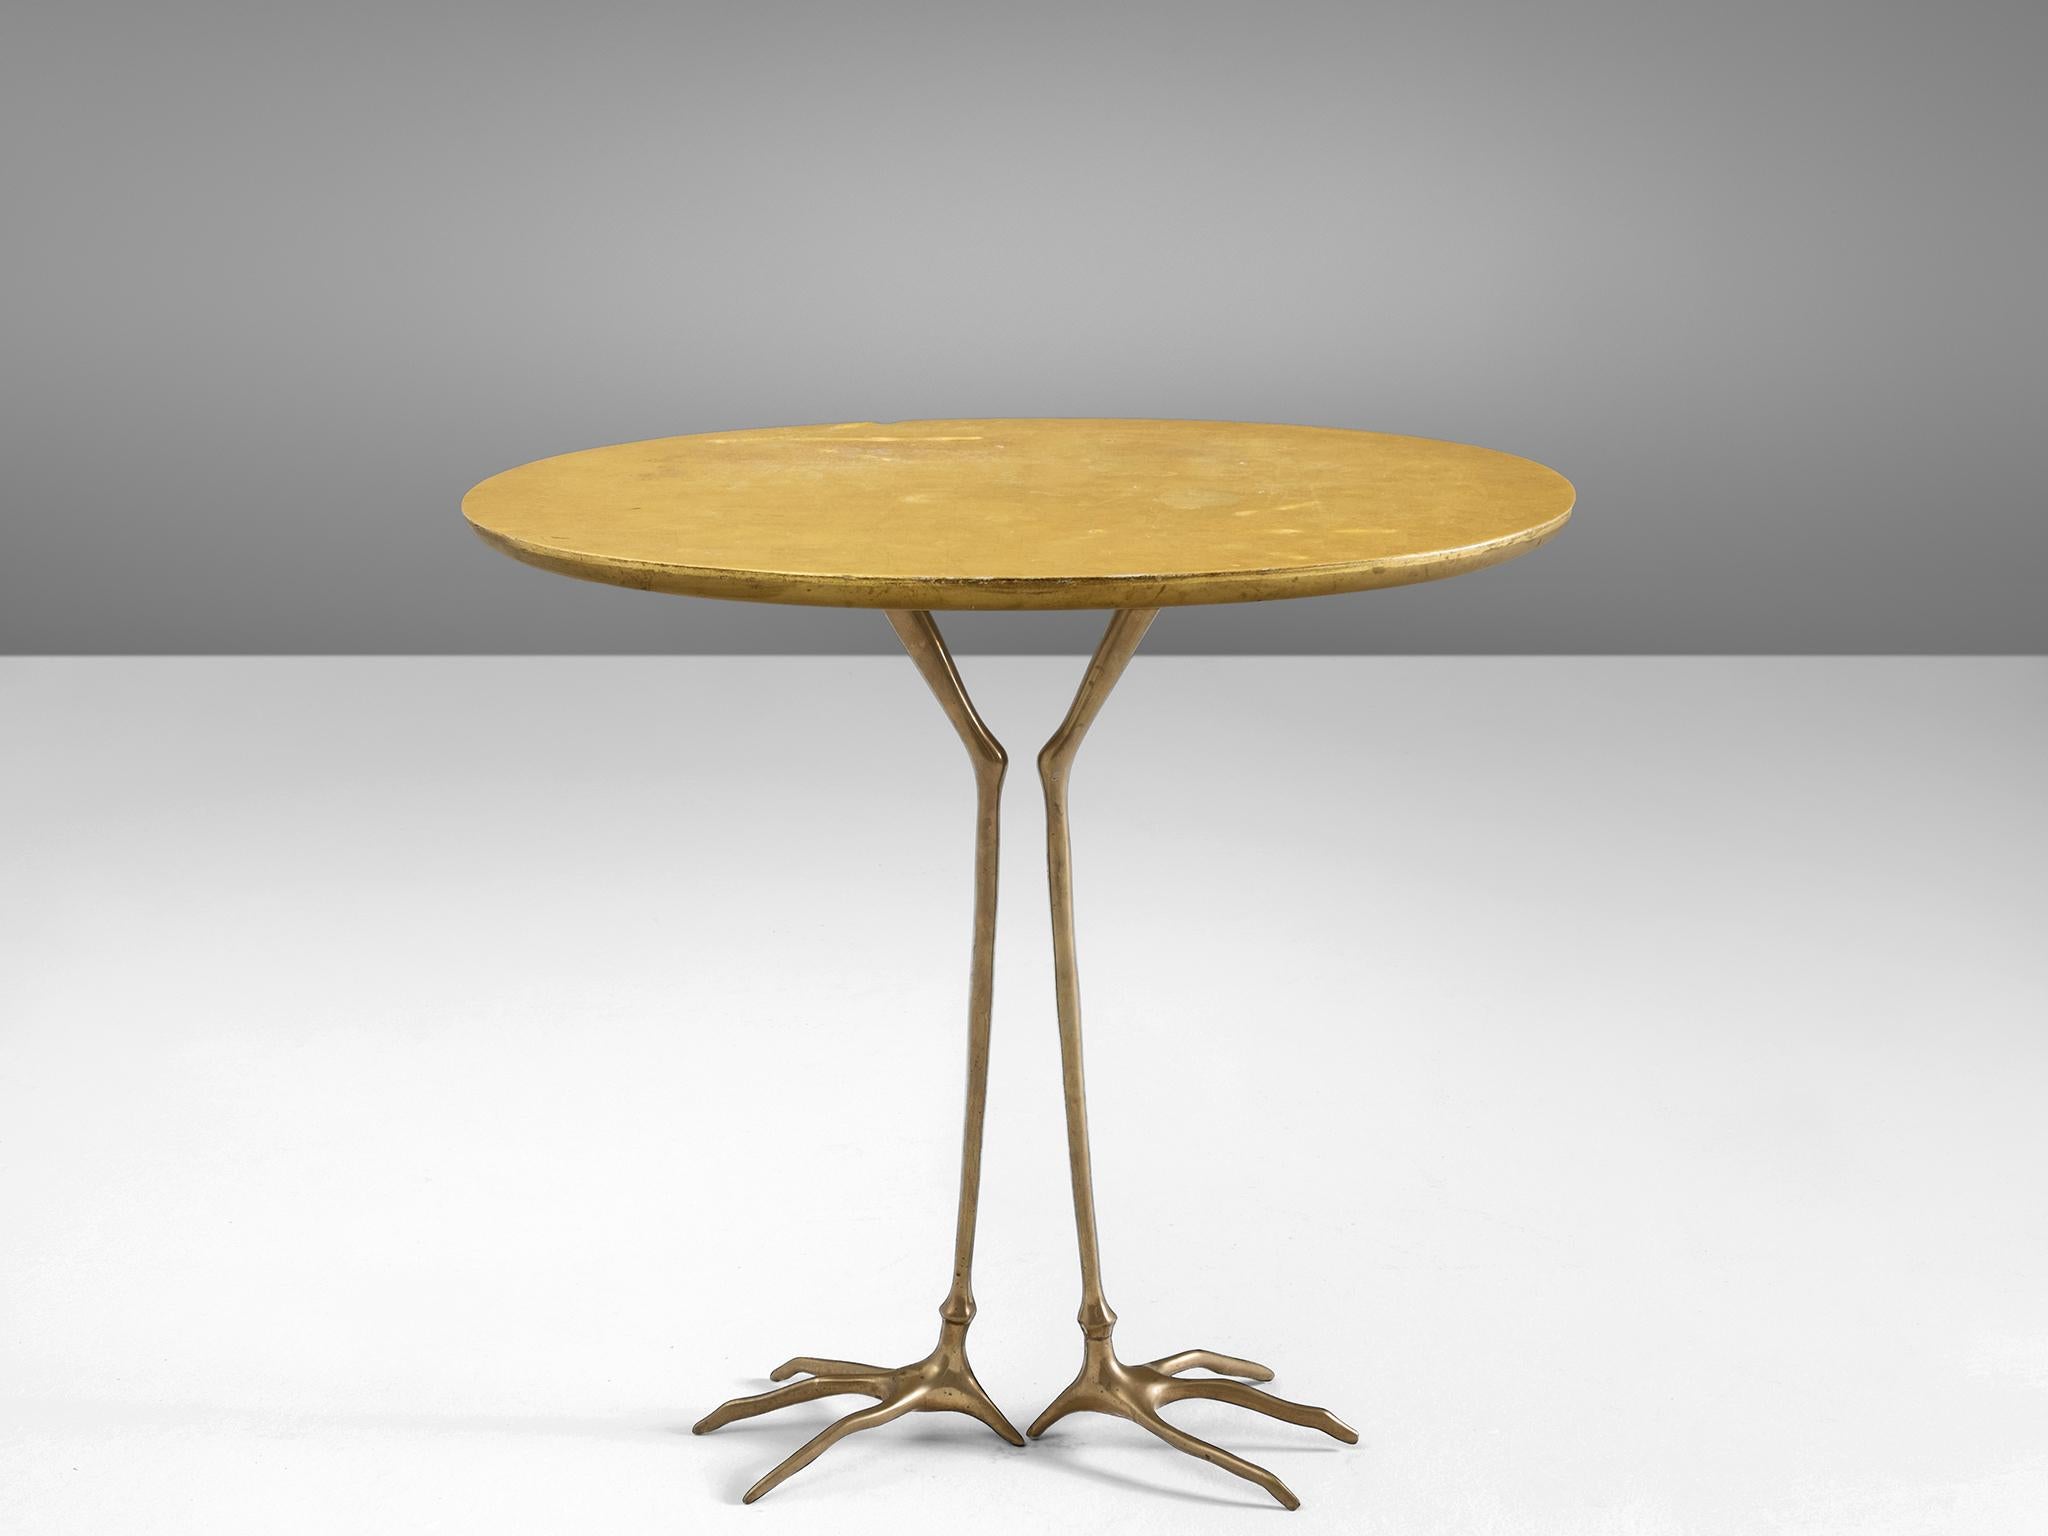 Méret Oppenheim for Simon Gavina, 'Traccia' coffee table, in bronze, gold leaf and wood, Italy, 1970s.

This side table by surrealist artist Méret Oppenheim is part of the 1972 serial production, called 'Ultramobile', of the original design she